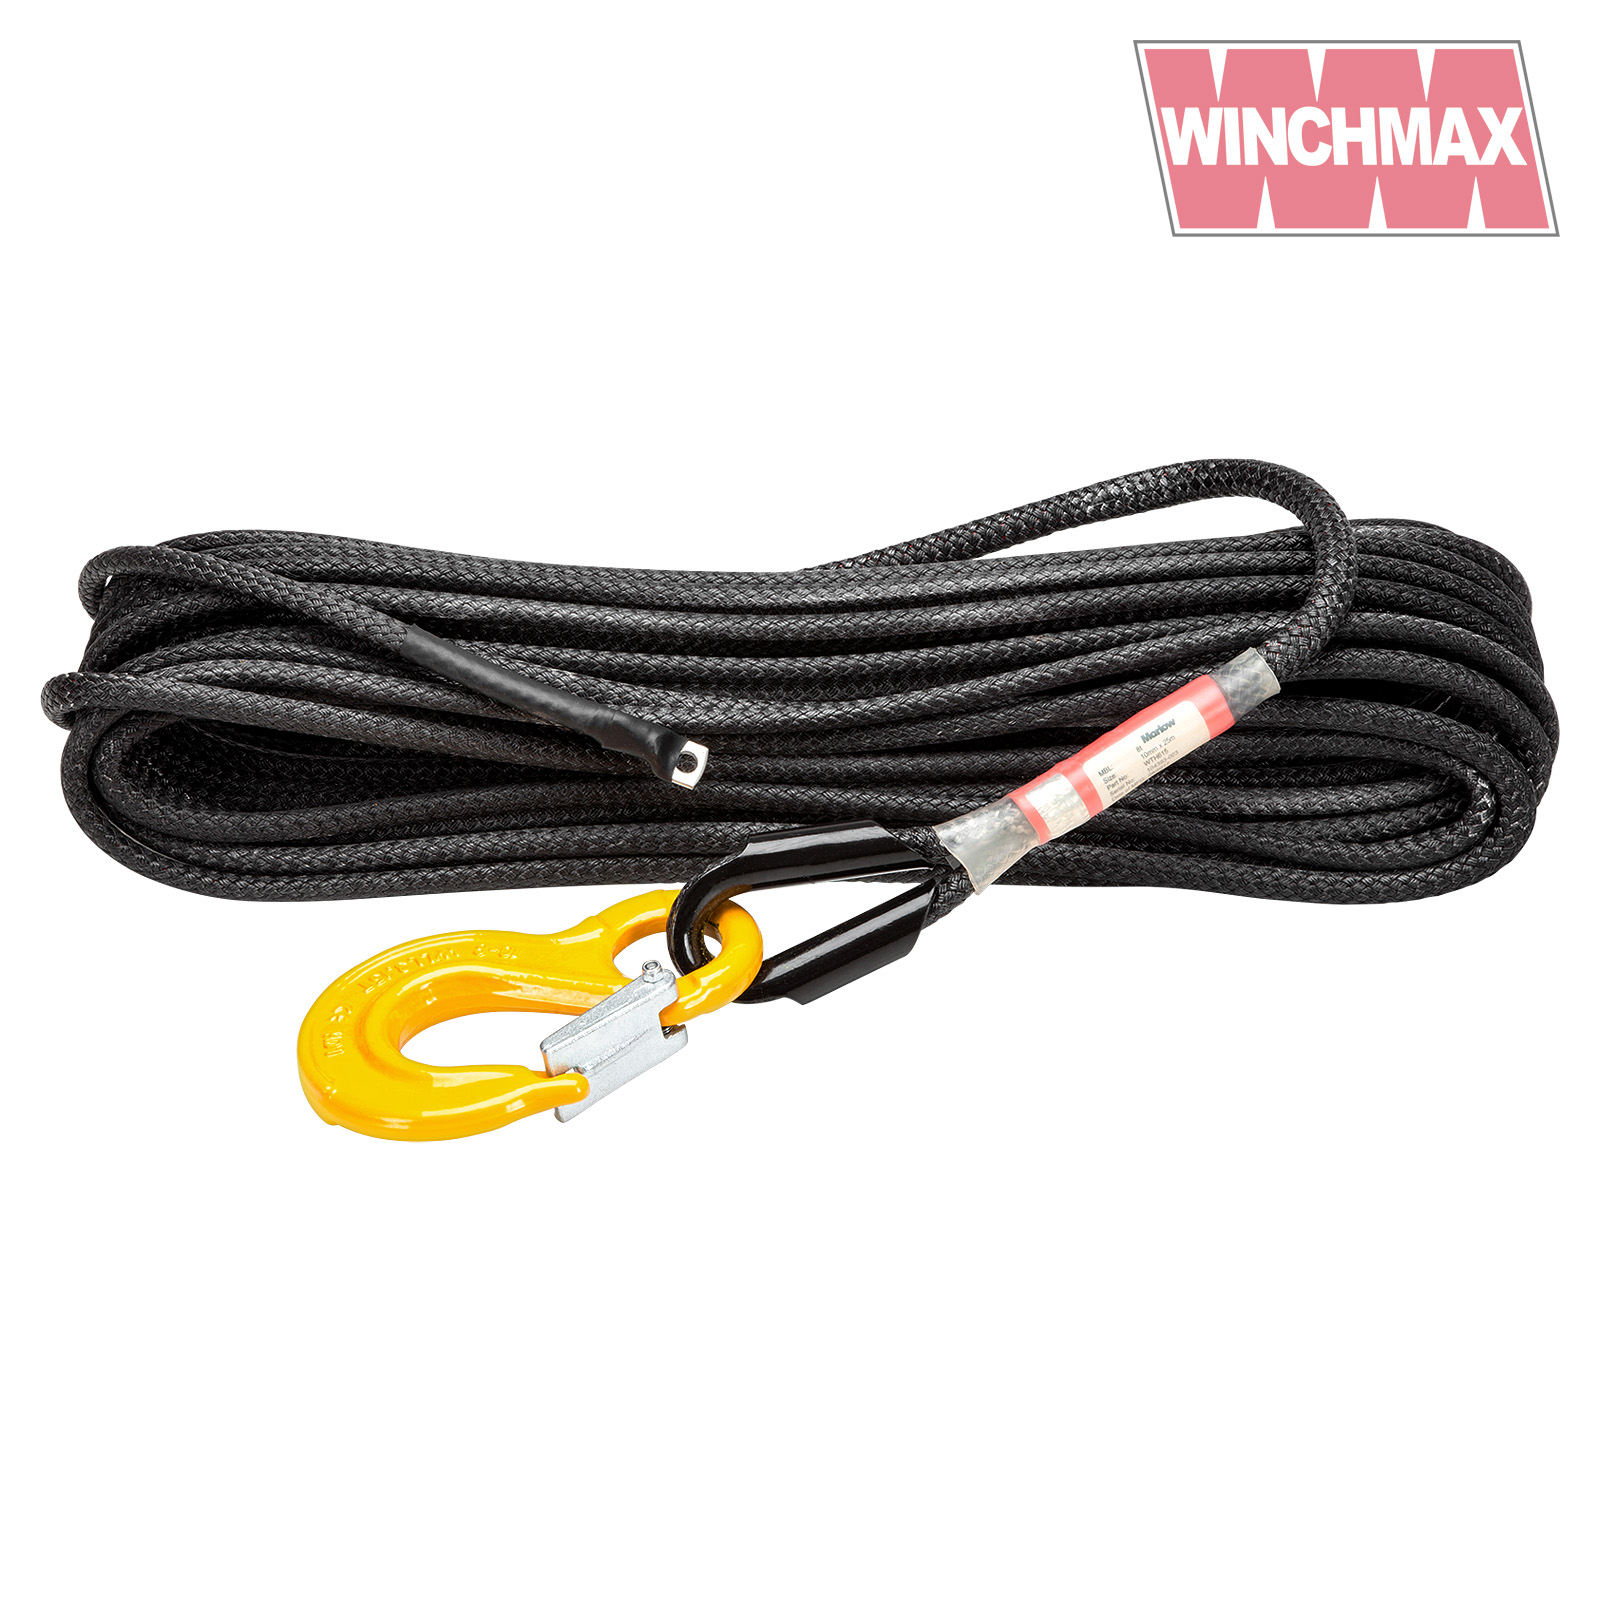 1/8 inch, Black Dacron Guy Rope (200 ft Hank) - Max-Gain Systems